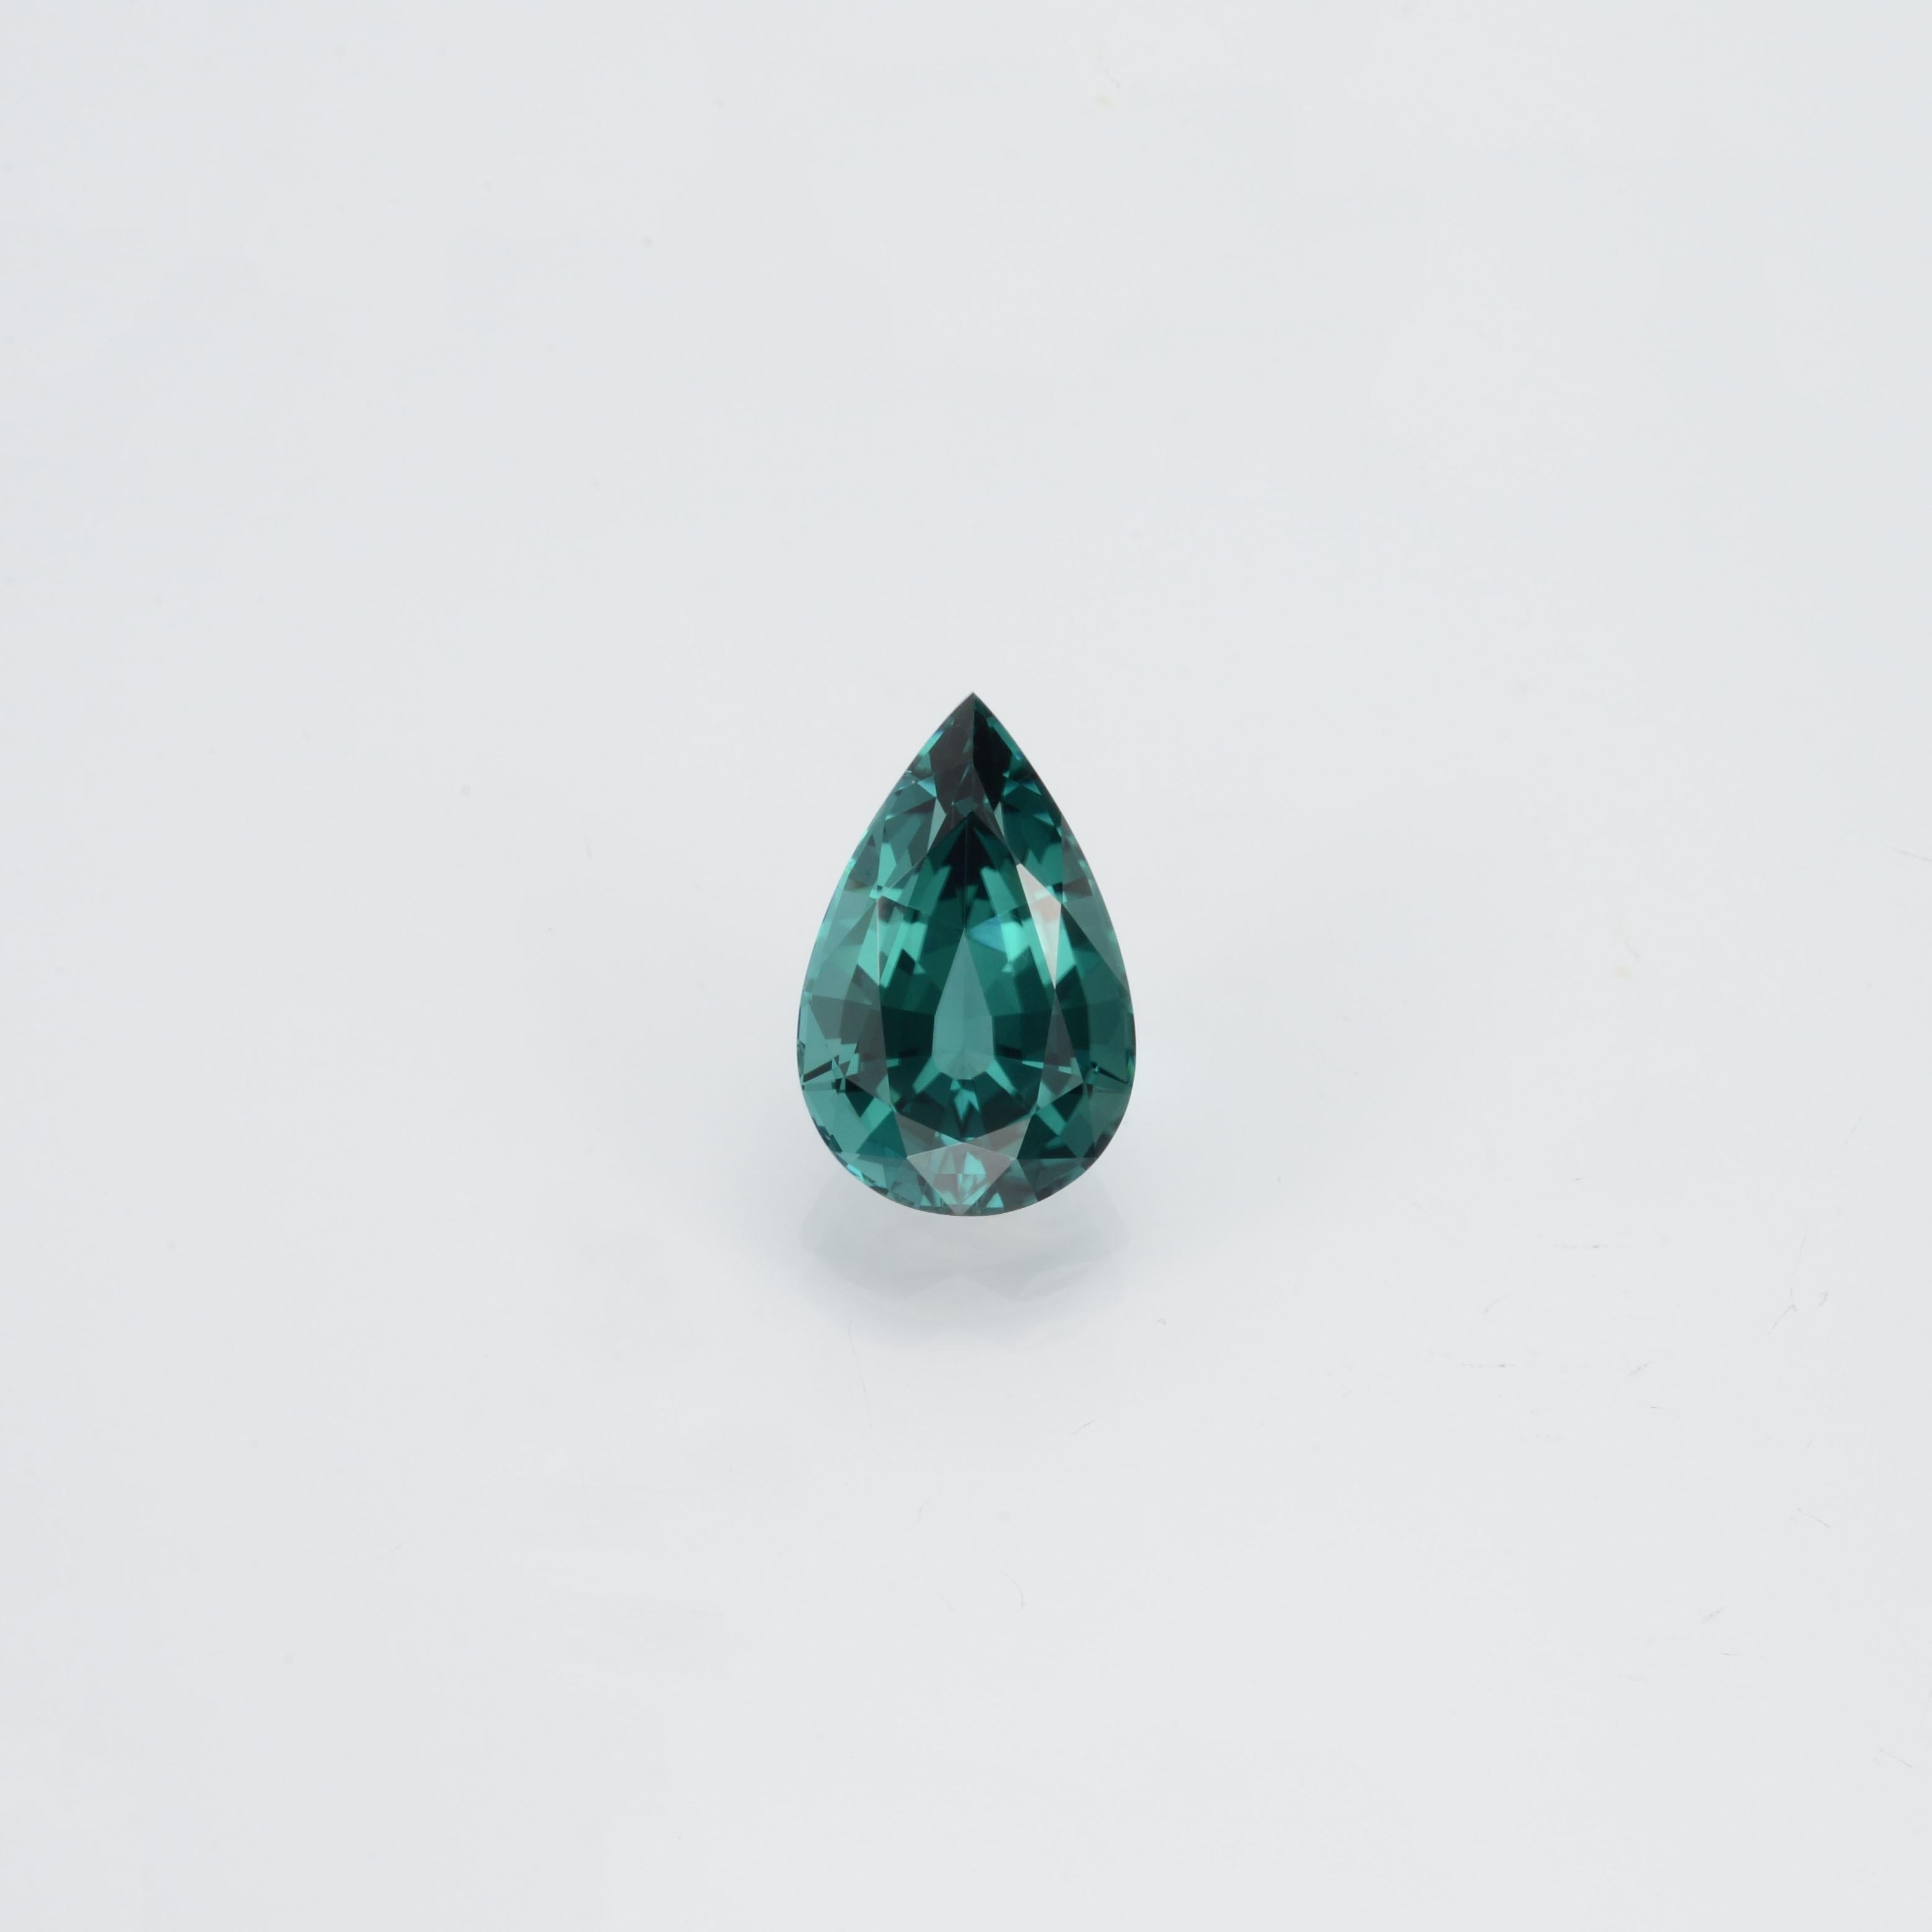 Exceptional 3.86 carat exotic Blue Tourmaline pear shape gem, offered loose to a special lady.
Returns are accepted and paid by us within 7 days of delivery.
We offer supreme custom jewelry work upon request. Please contact us for more details.
For